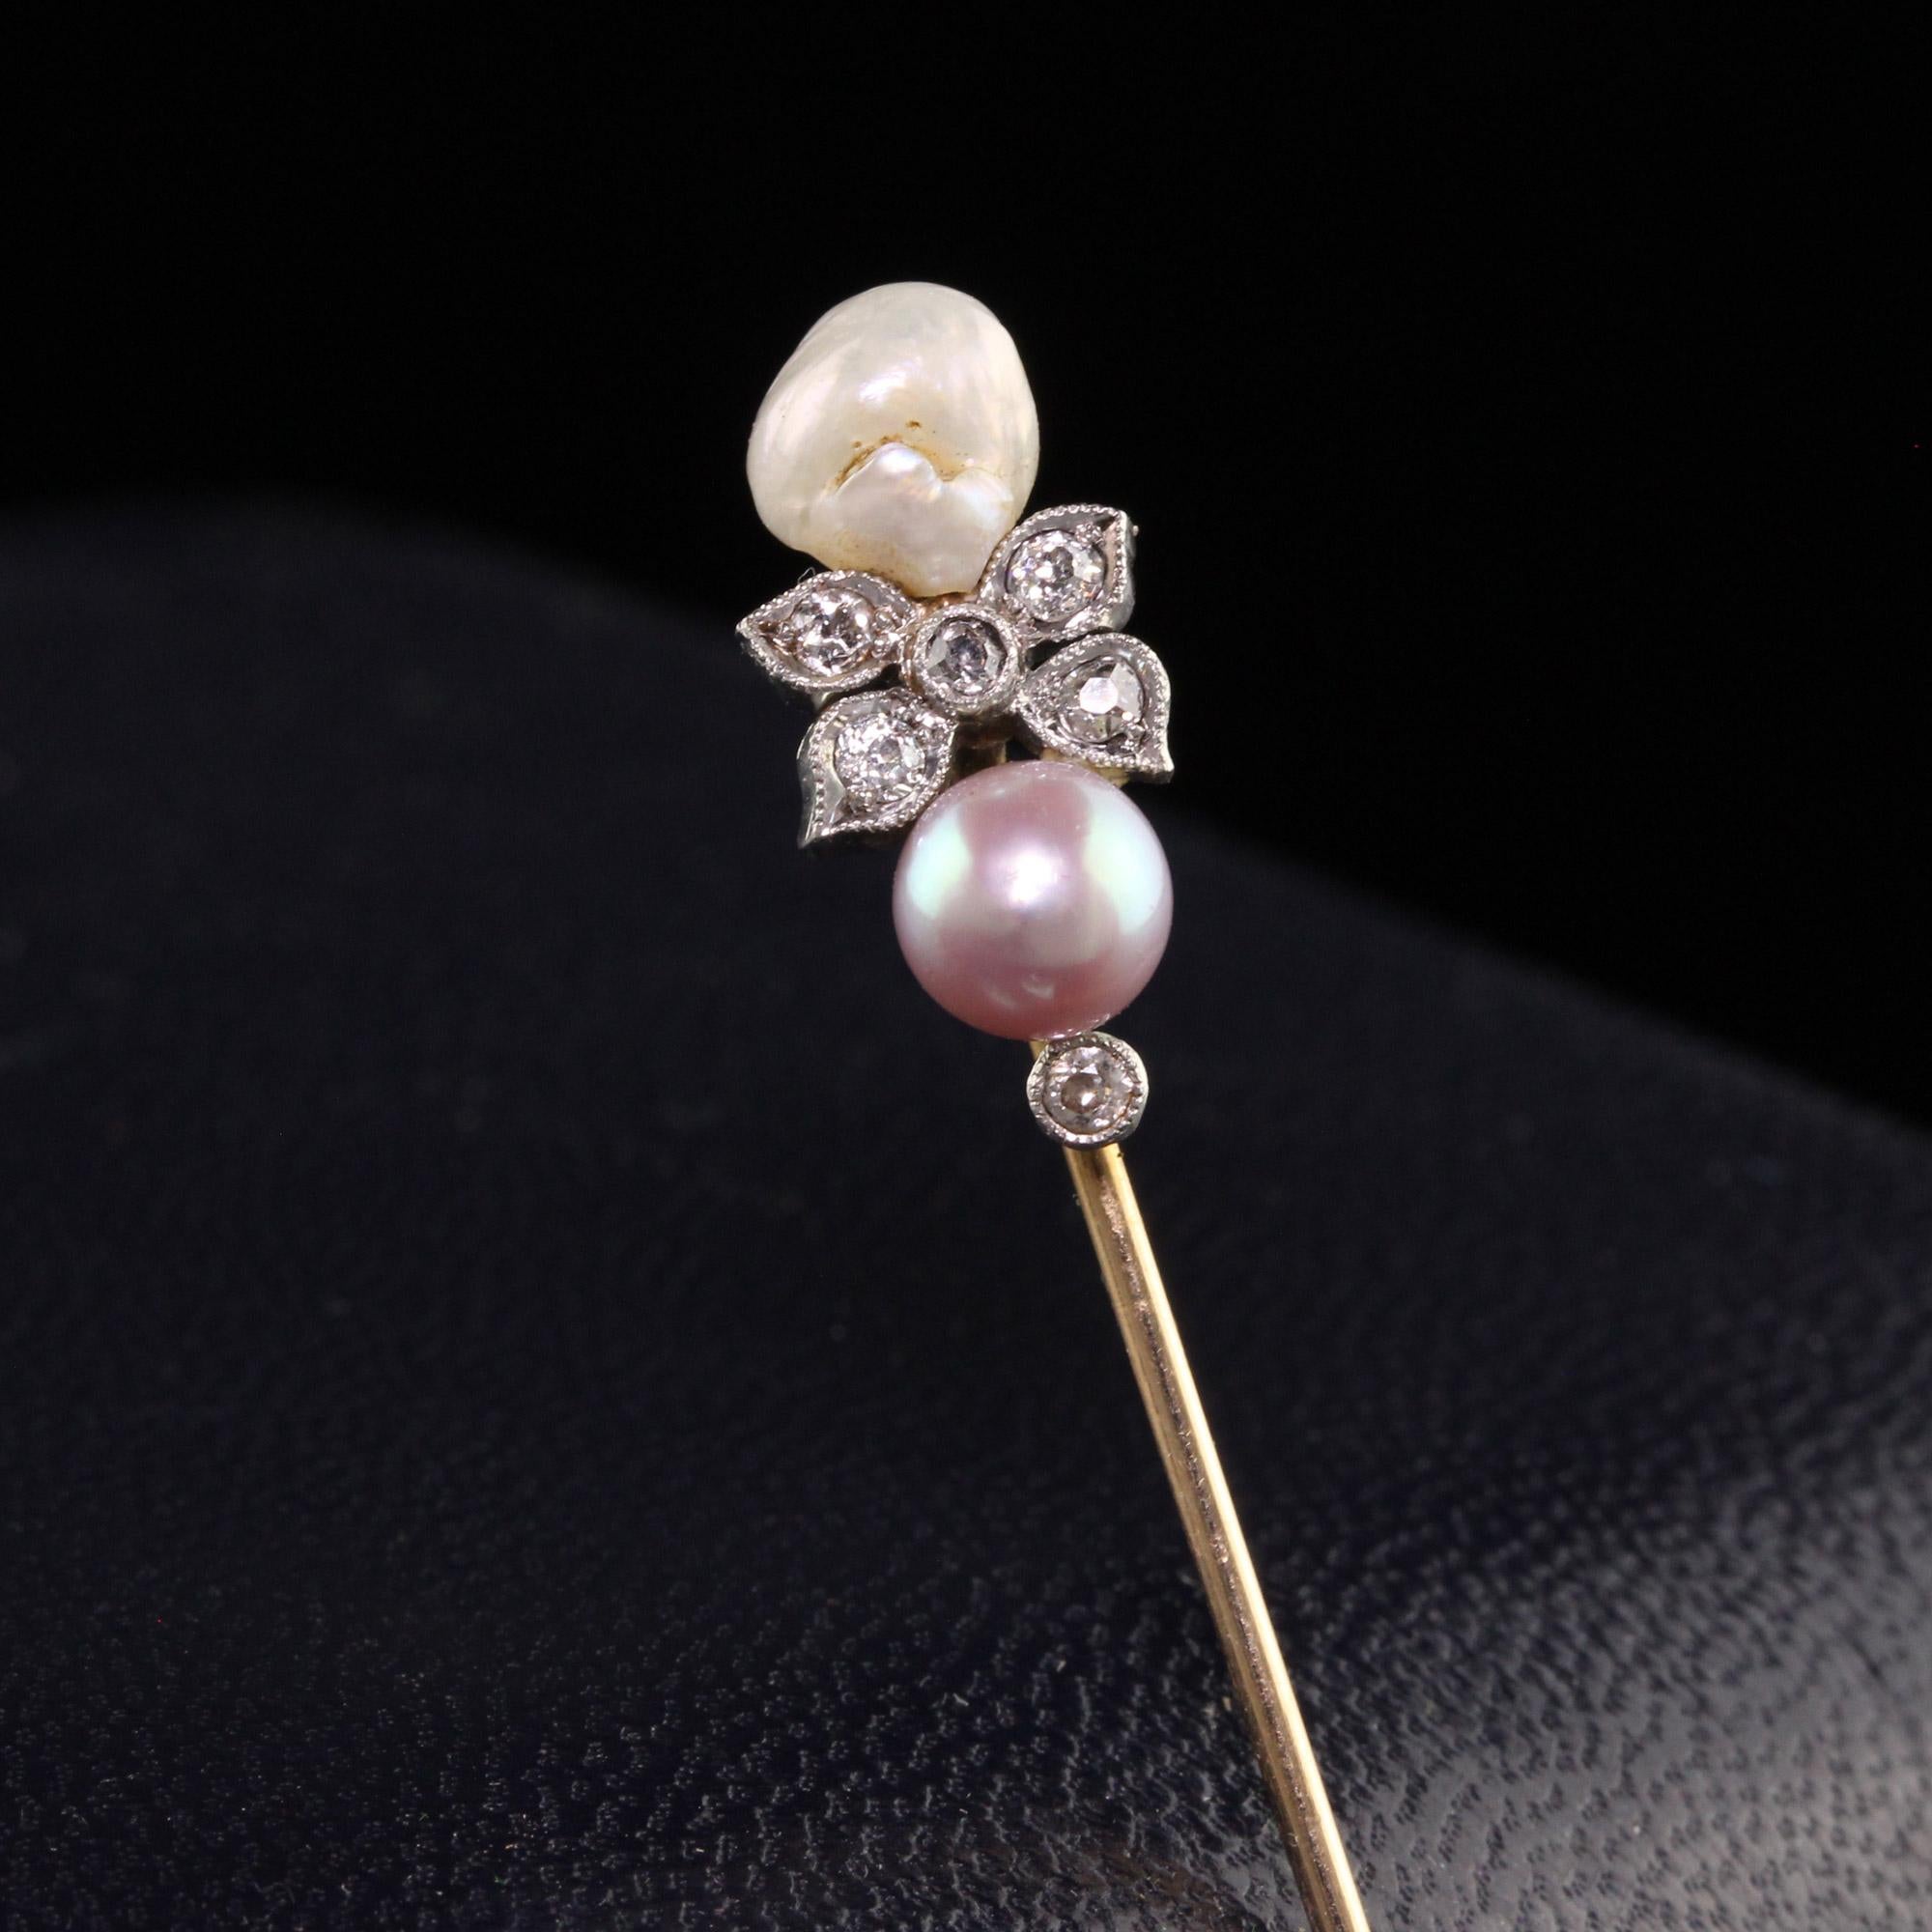 Beautiful Antique Edwardian 14K Yellow Gold and Platinum Natural Pearl Diamond Stick Pin. This beautiful pin is crafted in 14k yellow gold and platinum. The stick pin has a natural pearl above and below. One is a white hue and the other is a pink